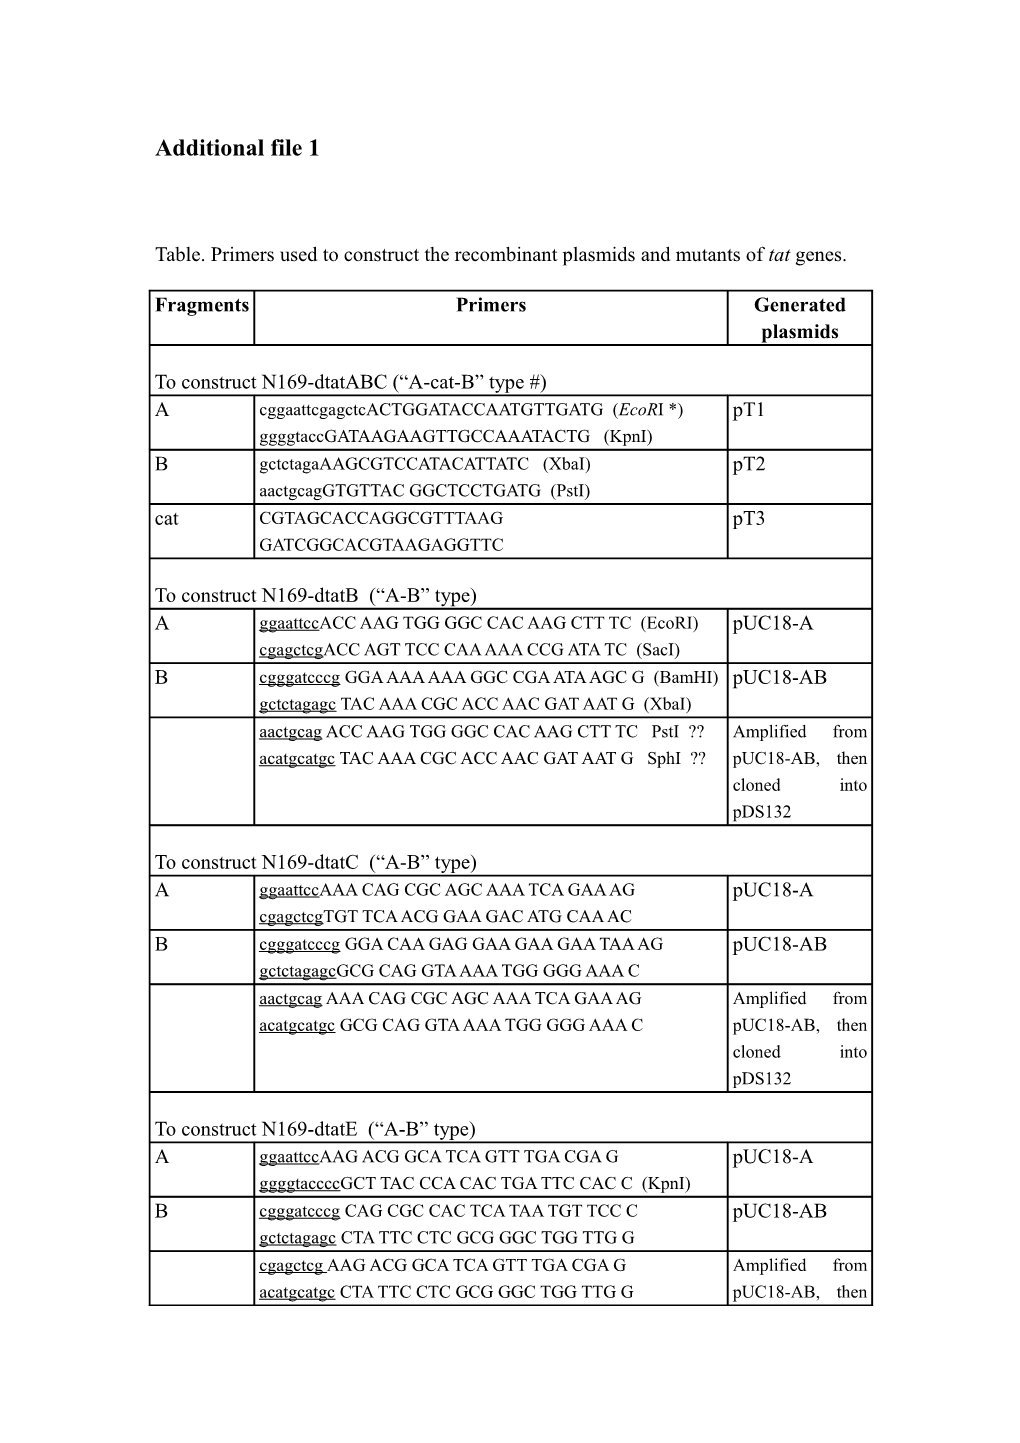 Table. Primers Used to Construct the Recombinant Plasmids and Mutants of Tat Genes